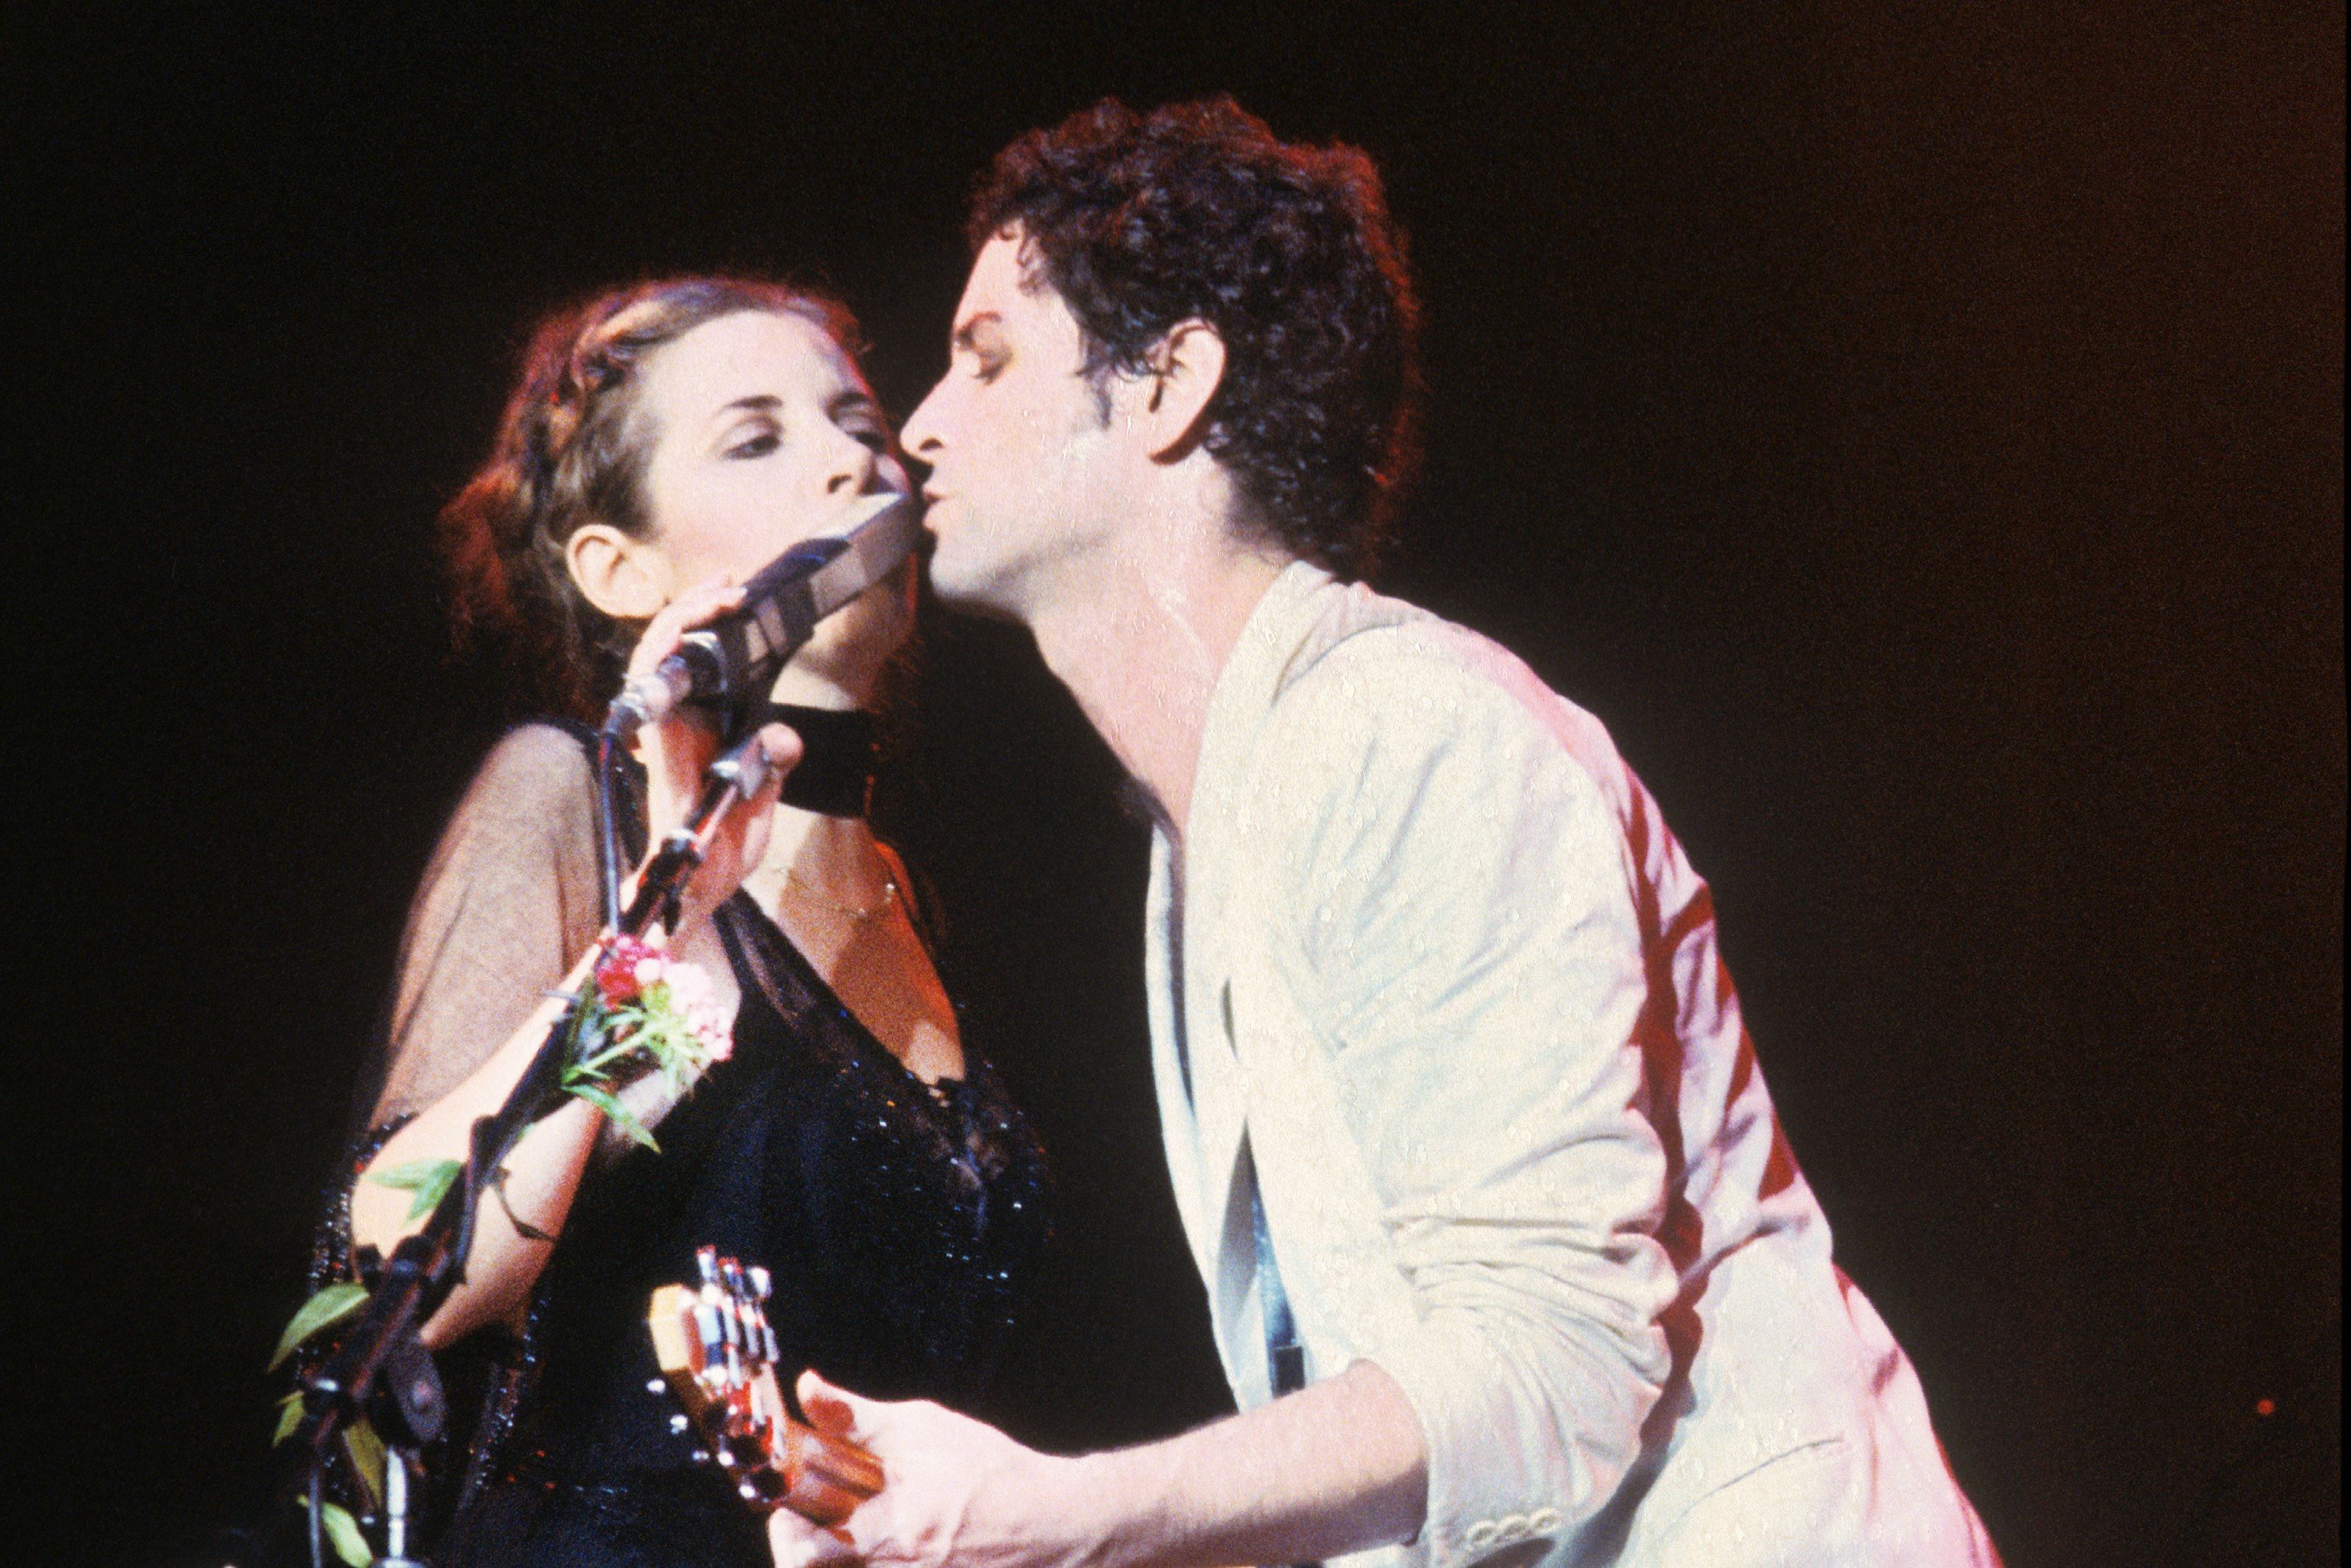 A photo of Stevie Nicks wearing a black dress and Lindsey Buckingham wearing a white jacket singing into the same microphone.